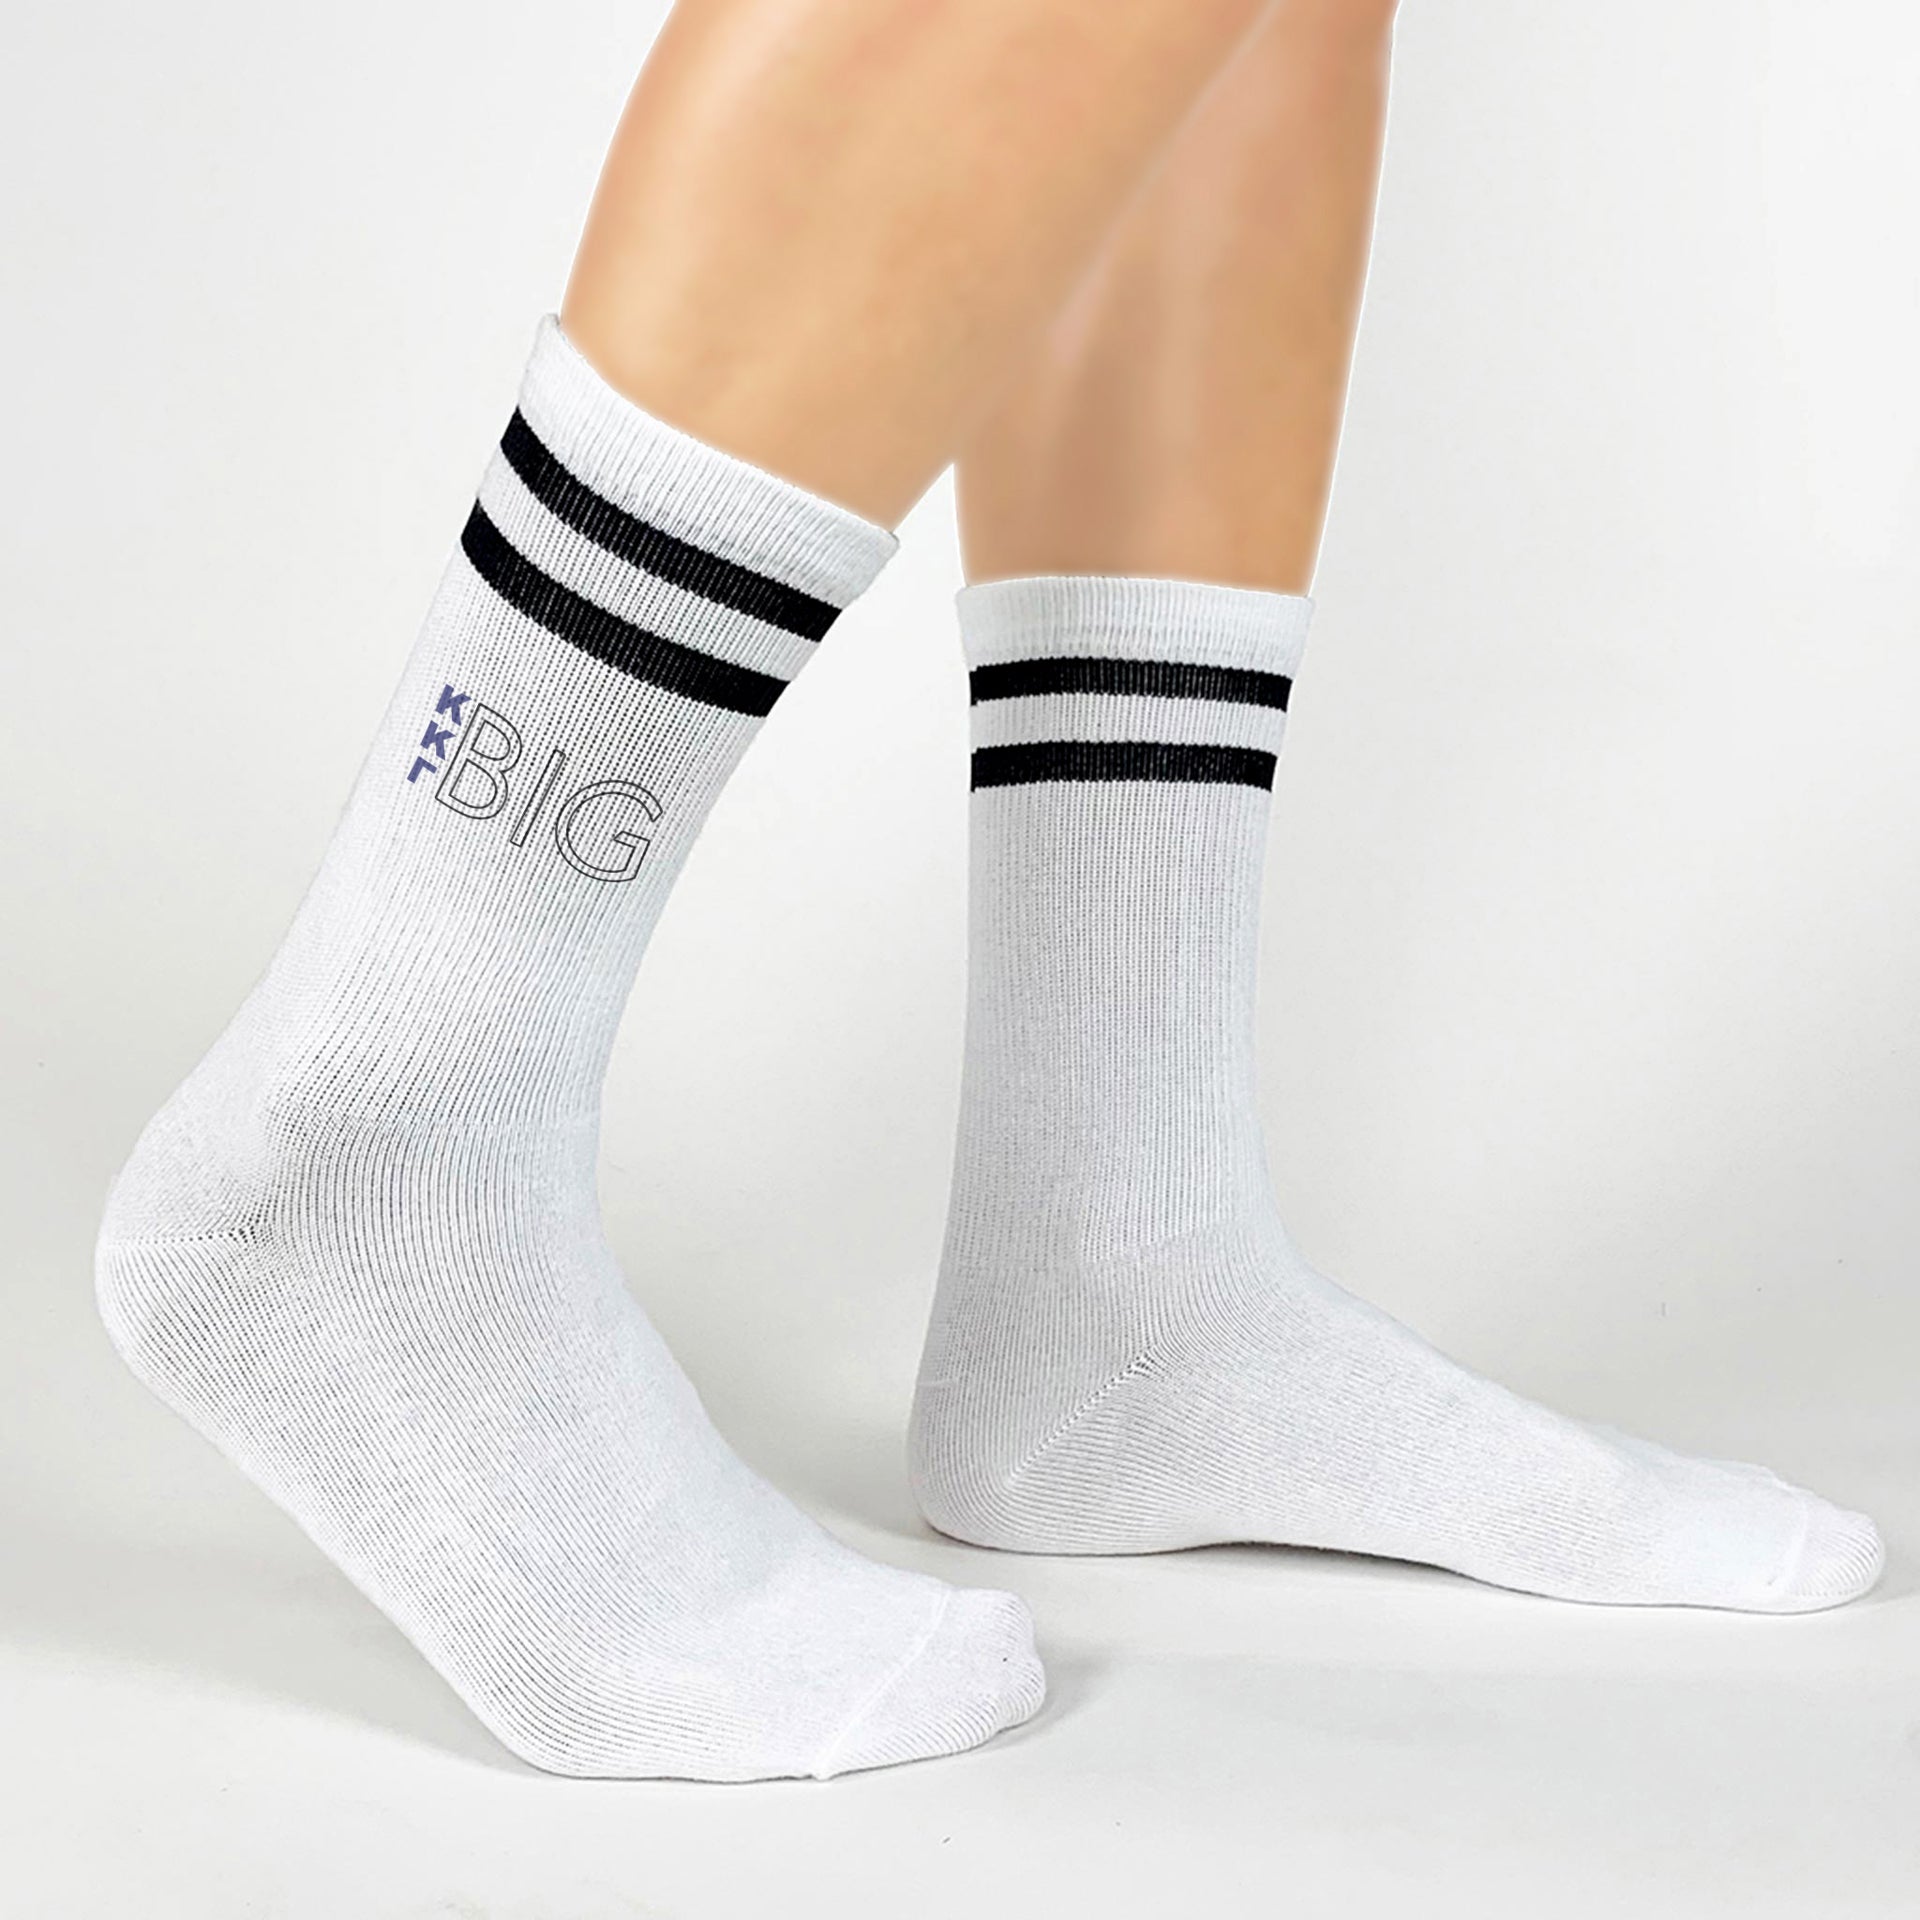 White cotton crew socks with black stripes custom printed Big design with greek letters make the perfect gift for your sorority sisters.